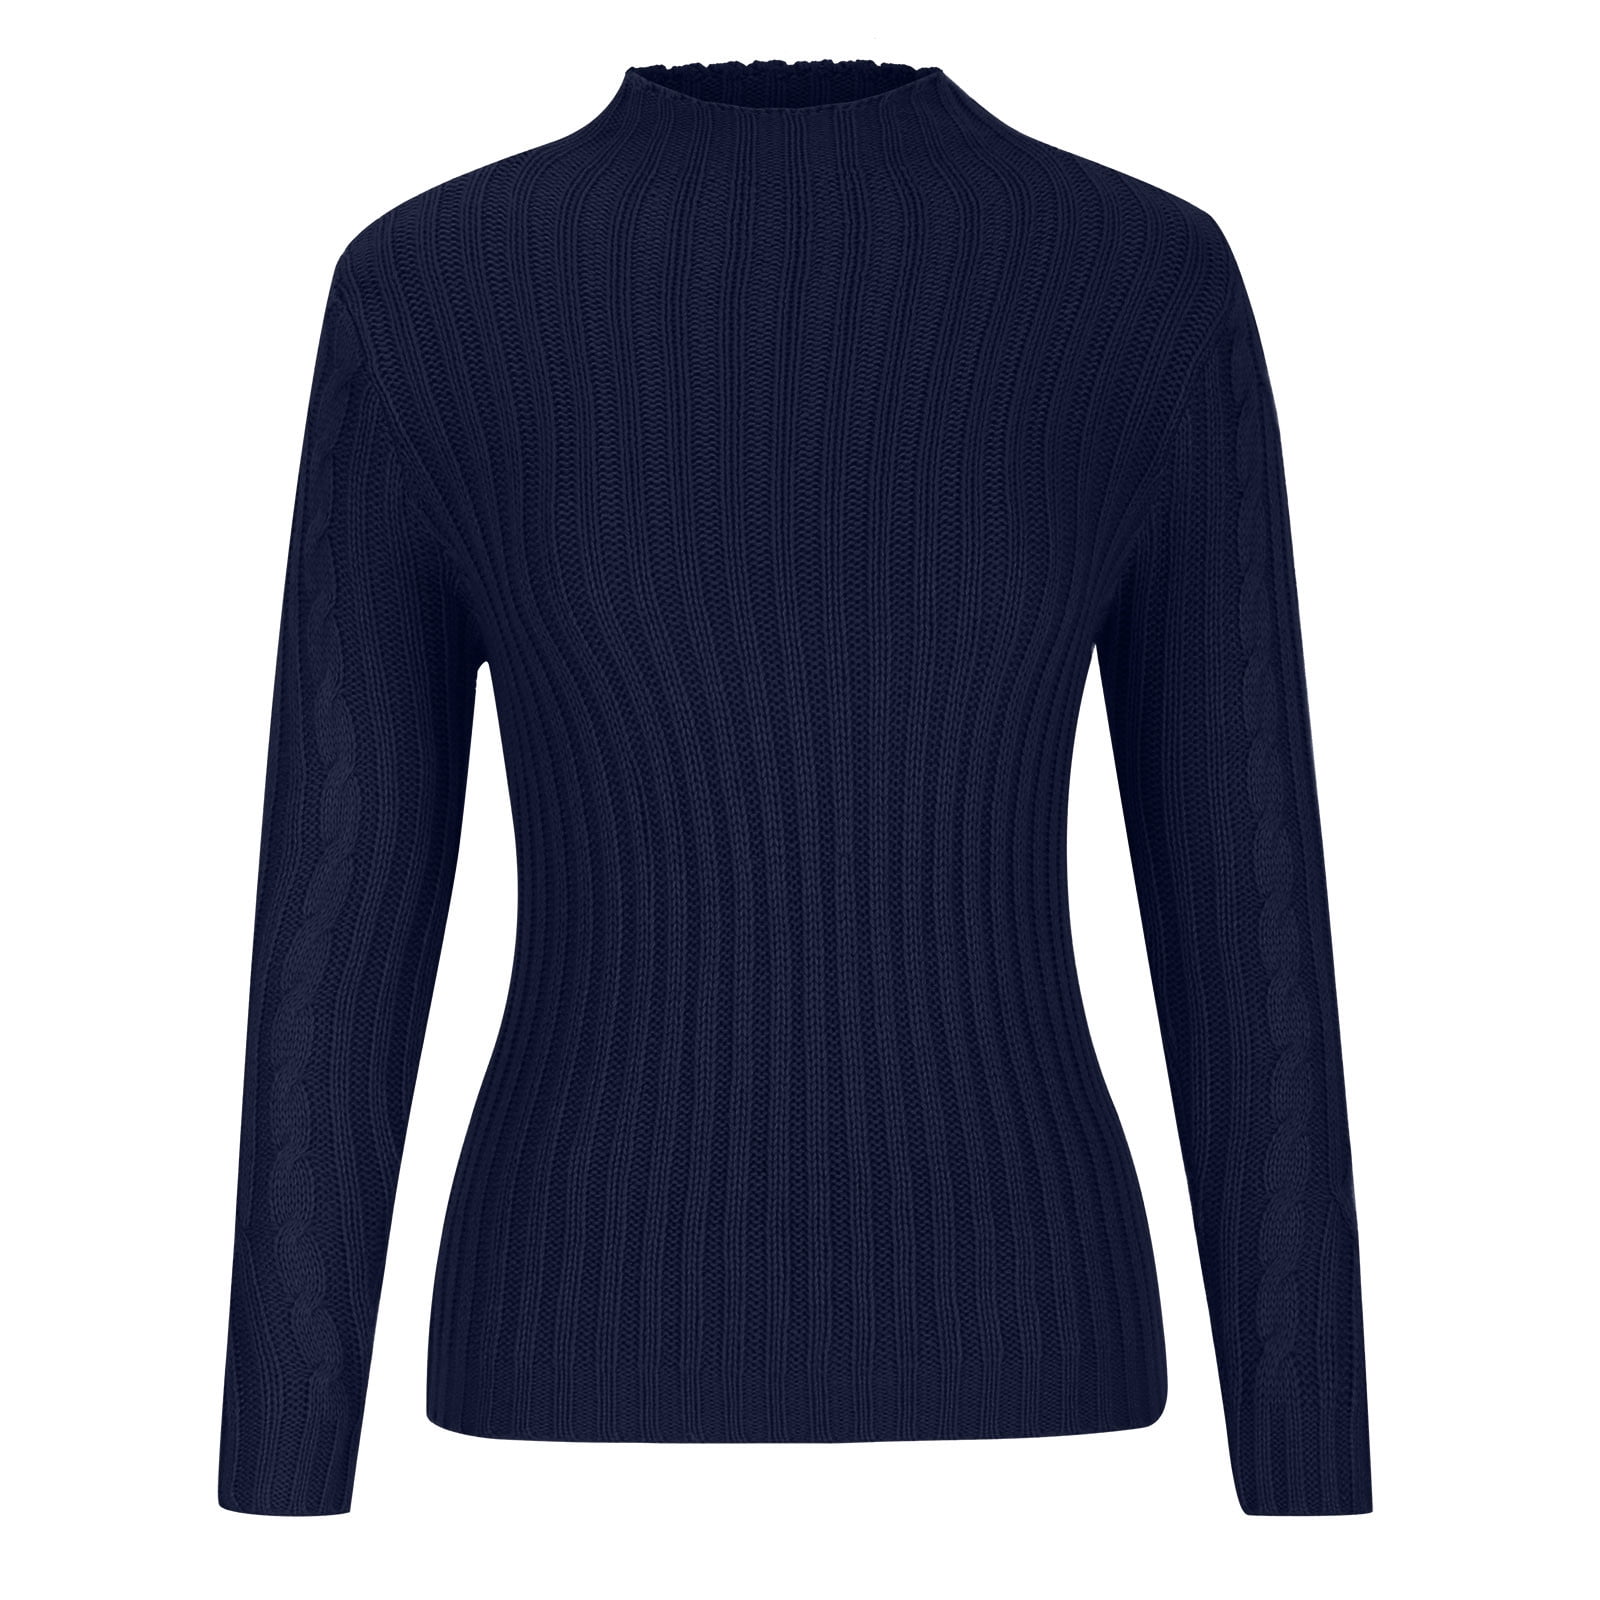 AXXD Plus Size Turtleneck Sweaters for Women Top Slim Long Sleeve Solid ...